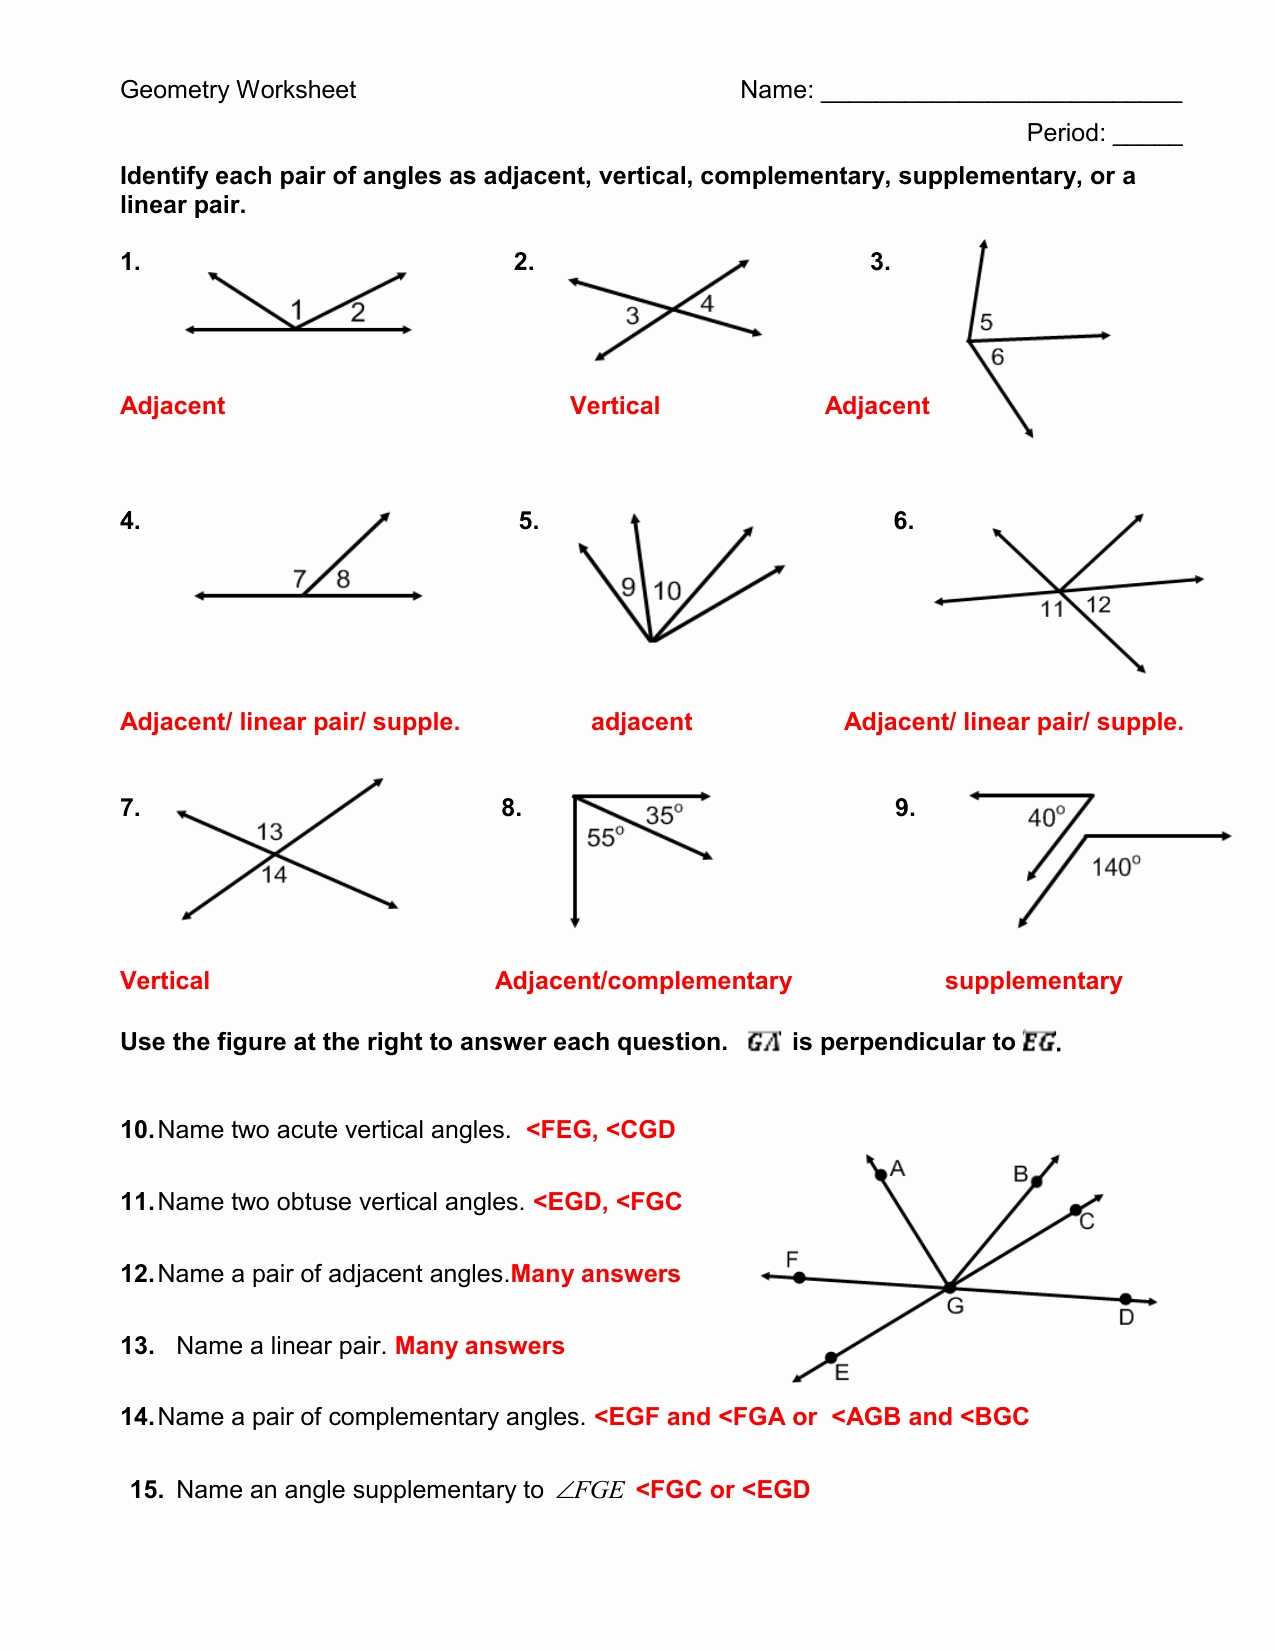 Angle Pair Relationships Worksheet Answers Also Angle Pairs Worksheet Worksheet Math for Kids